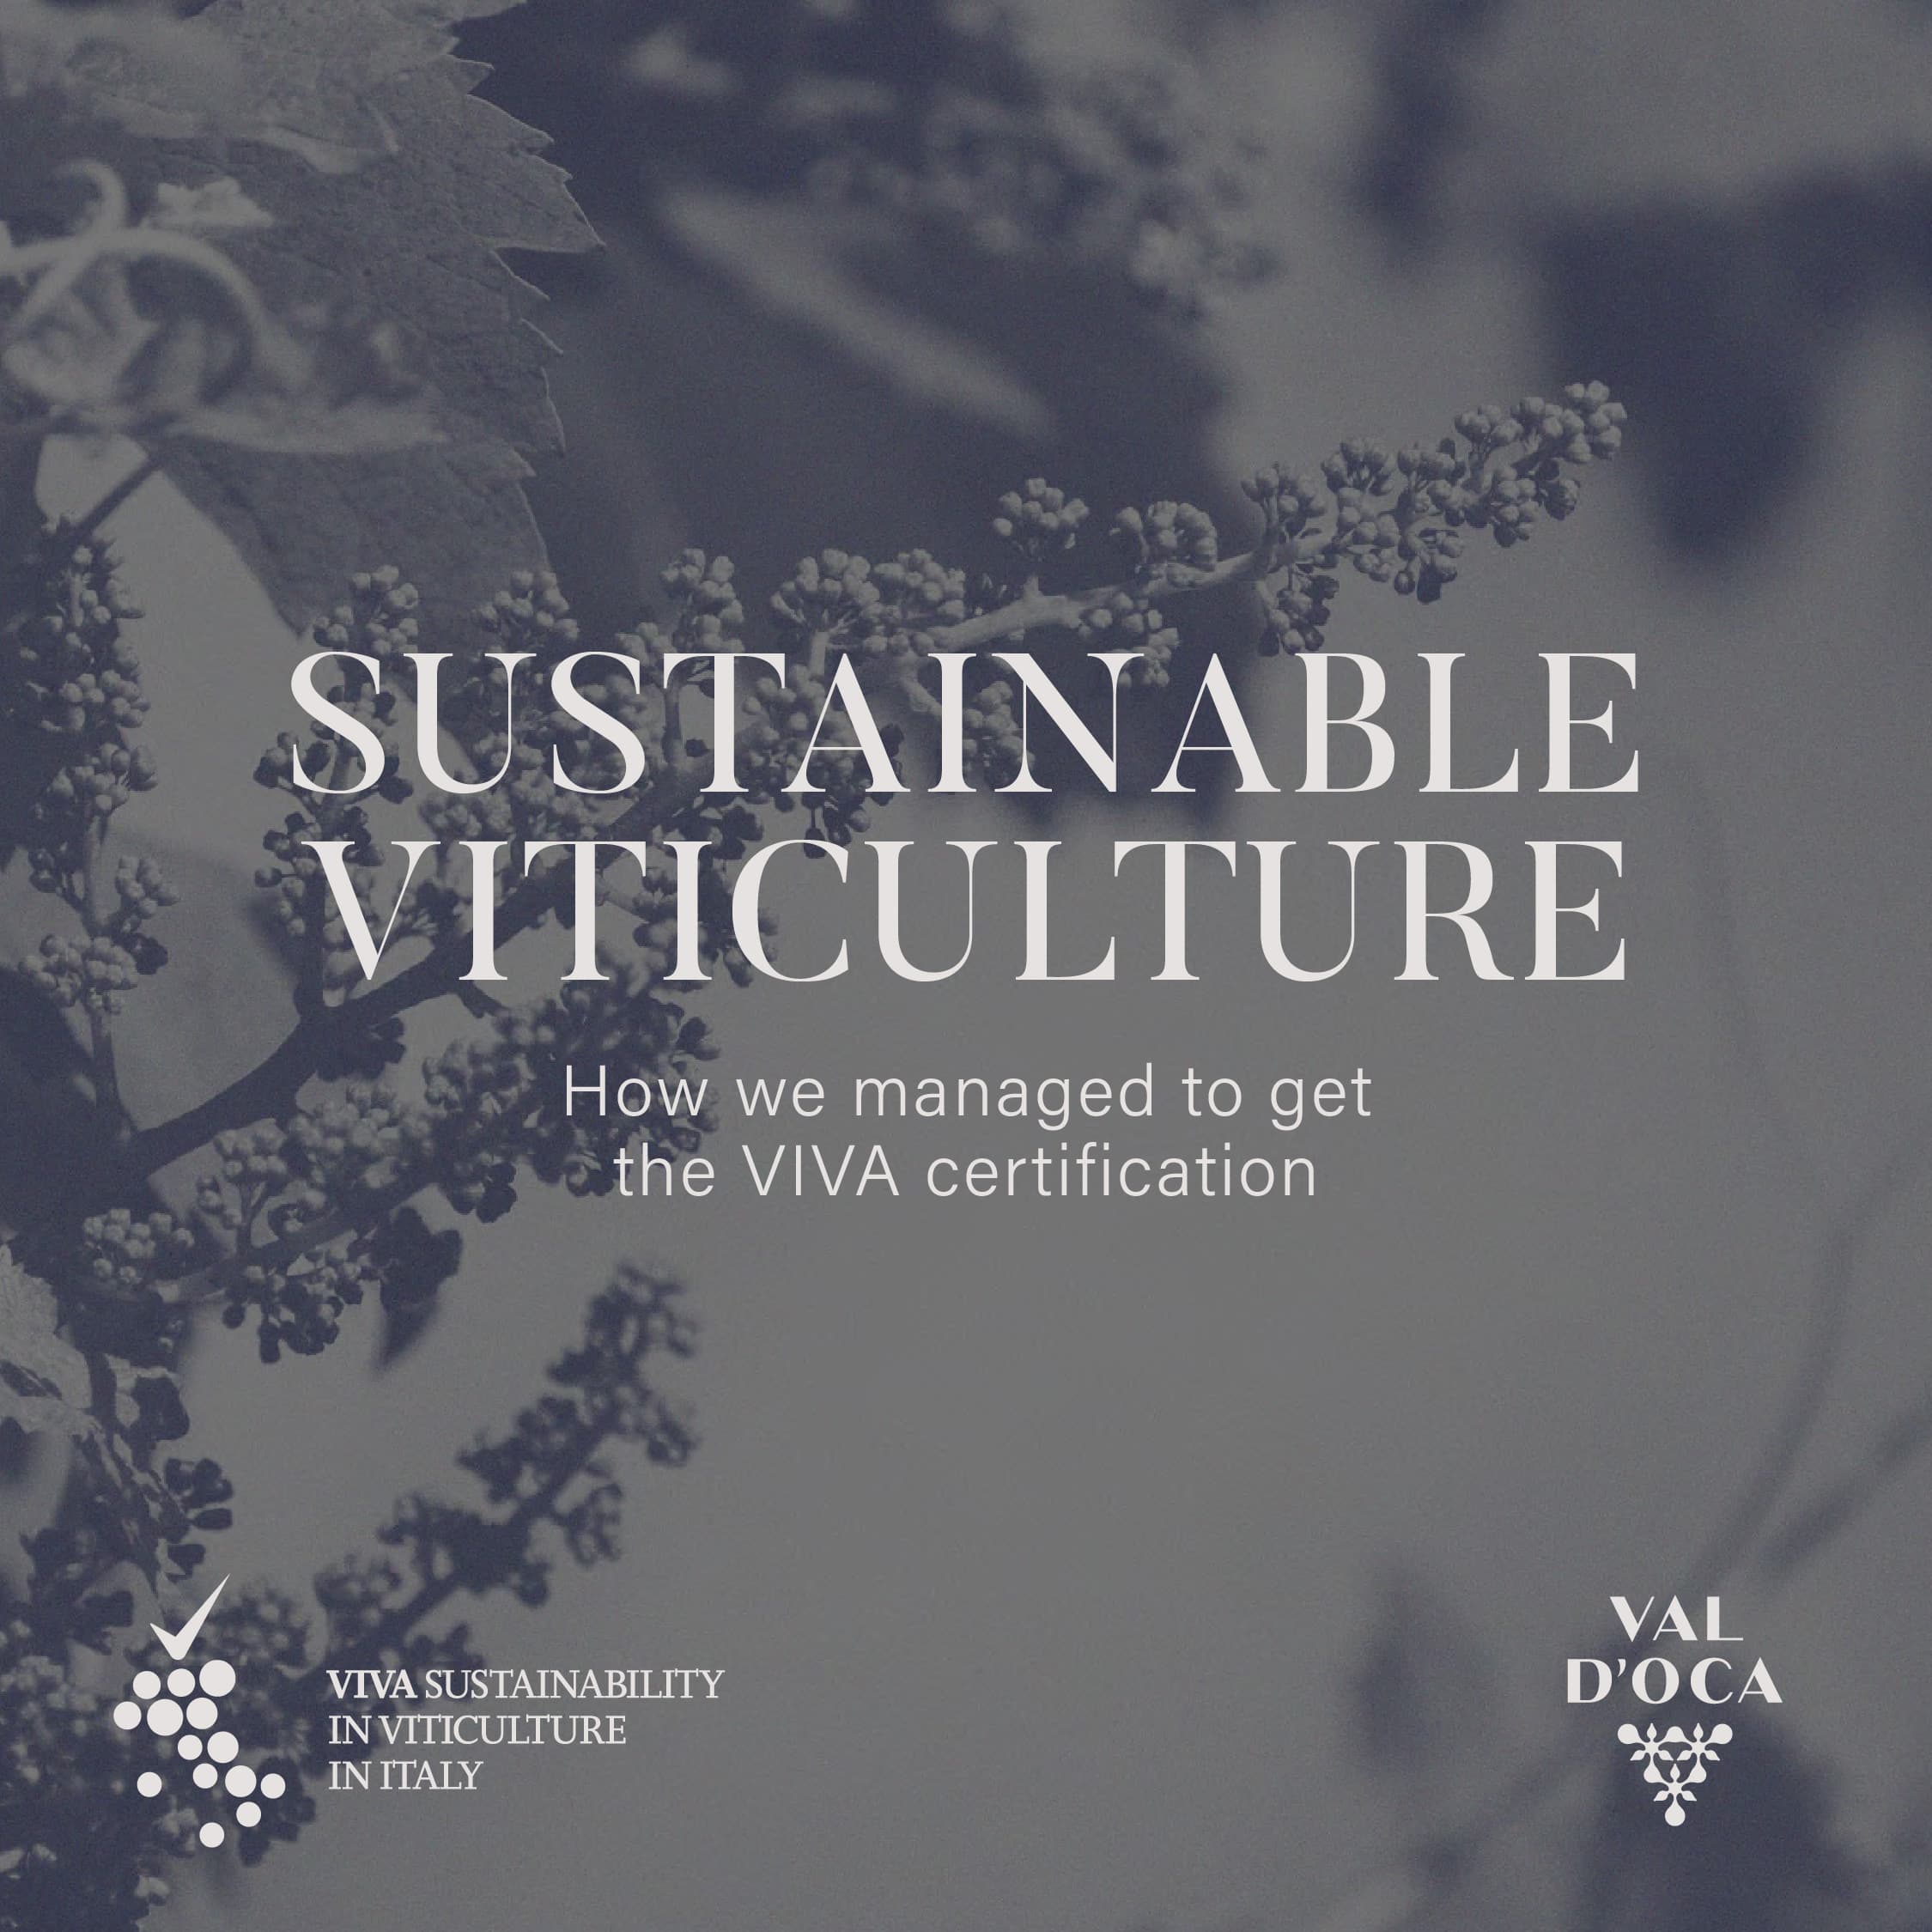 Val d'Oca: Commitment to Sustainable VIVA Certified Agricultural Practices